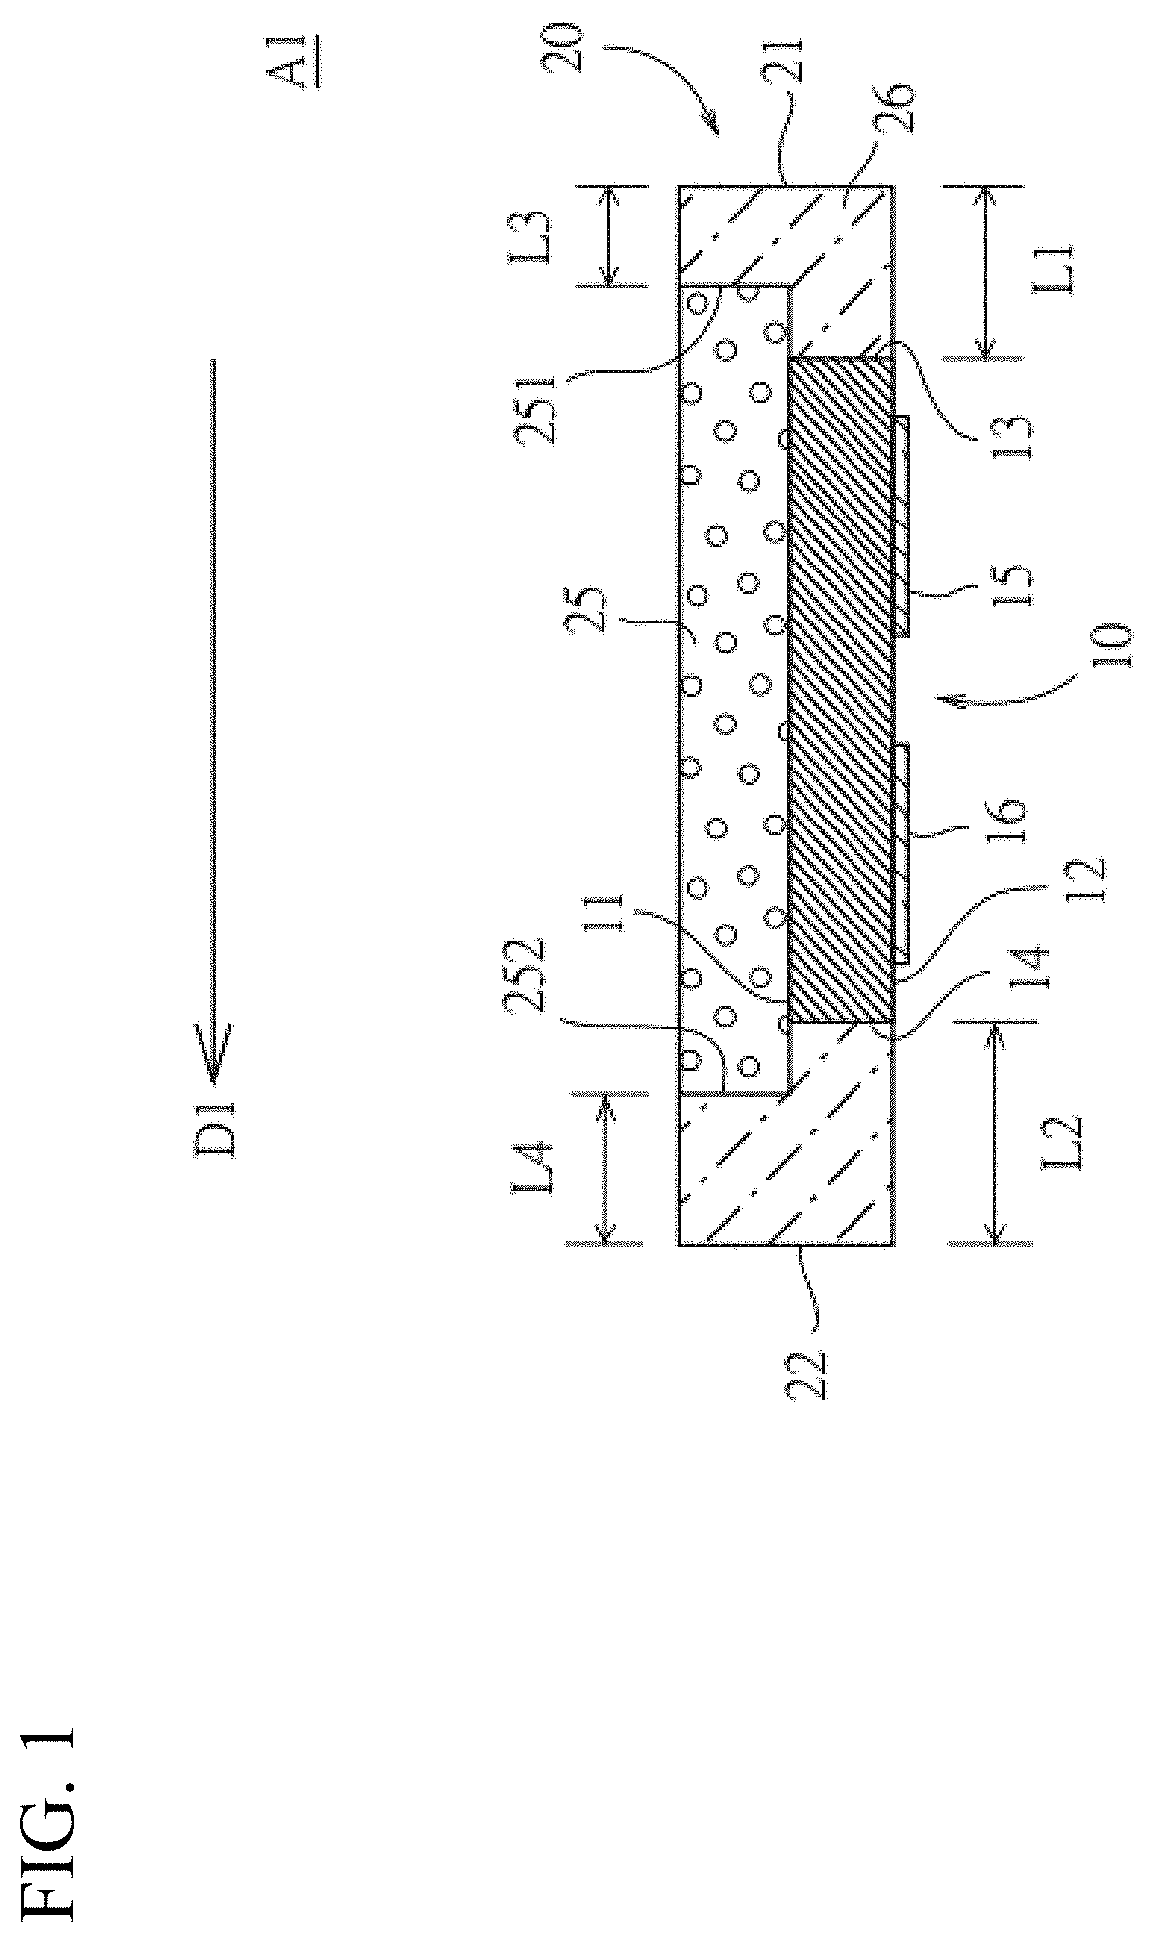 Chip-scale packaging light-emitting device with electrode polarity identifier and method of manufacturing the same